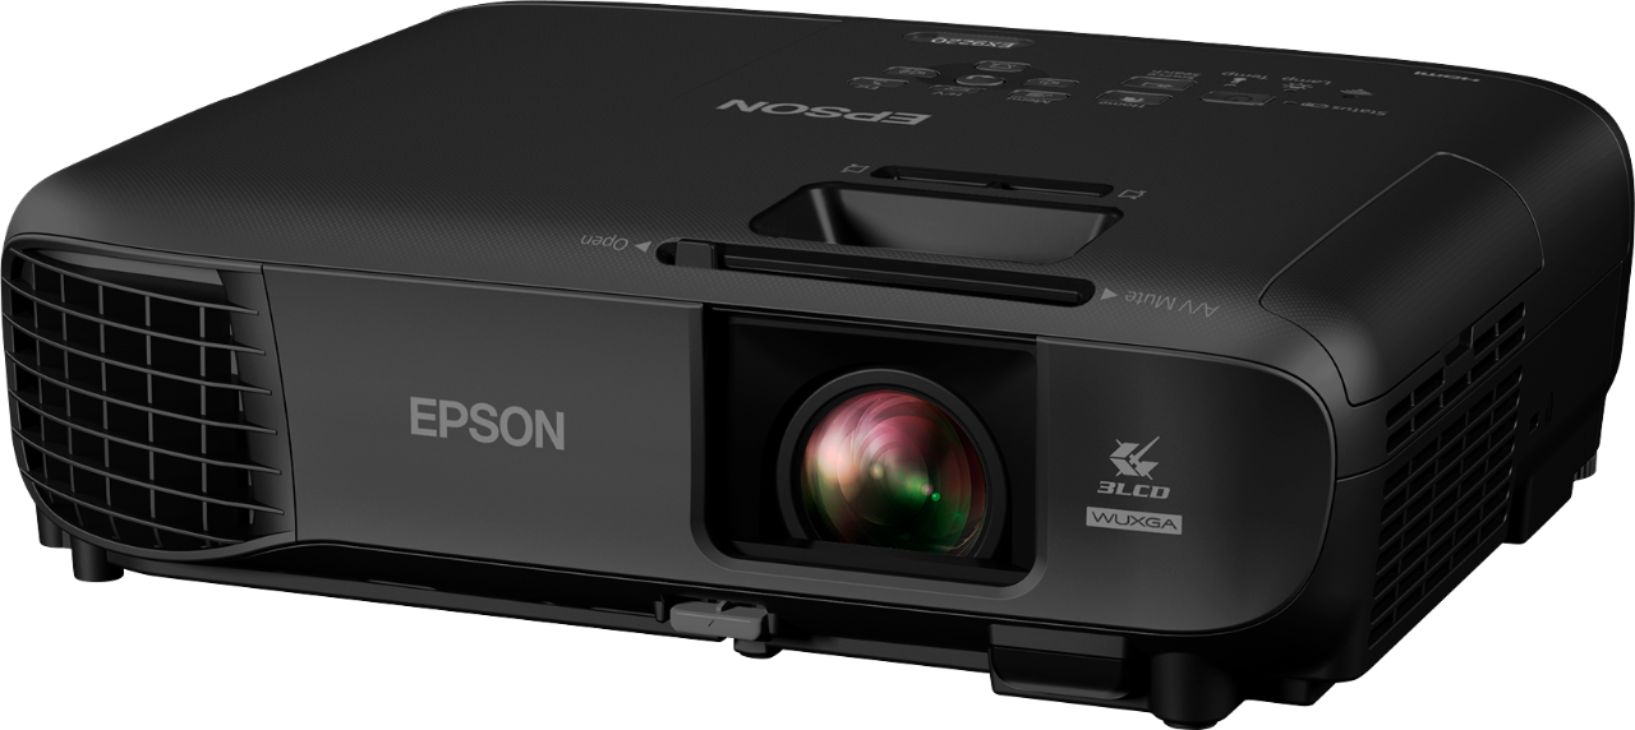 Left View: Epson - Refurbished Pro EX9220 1080p Wireless 3LCD Projector - Black